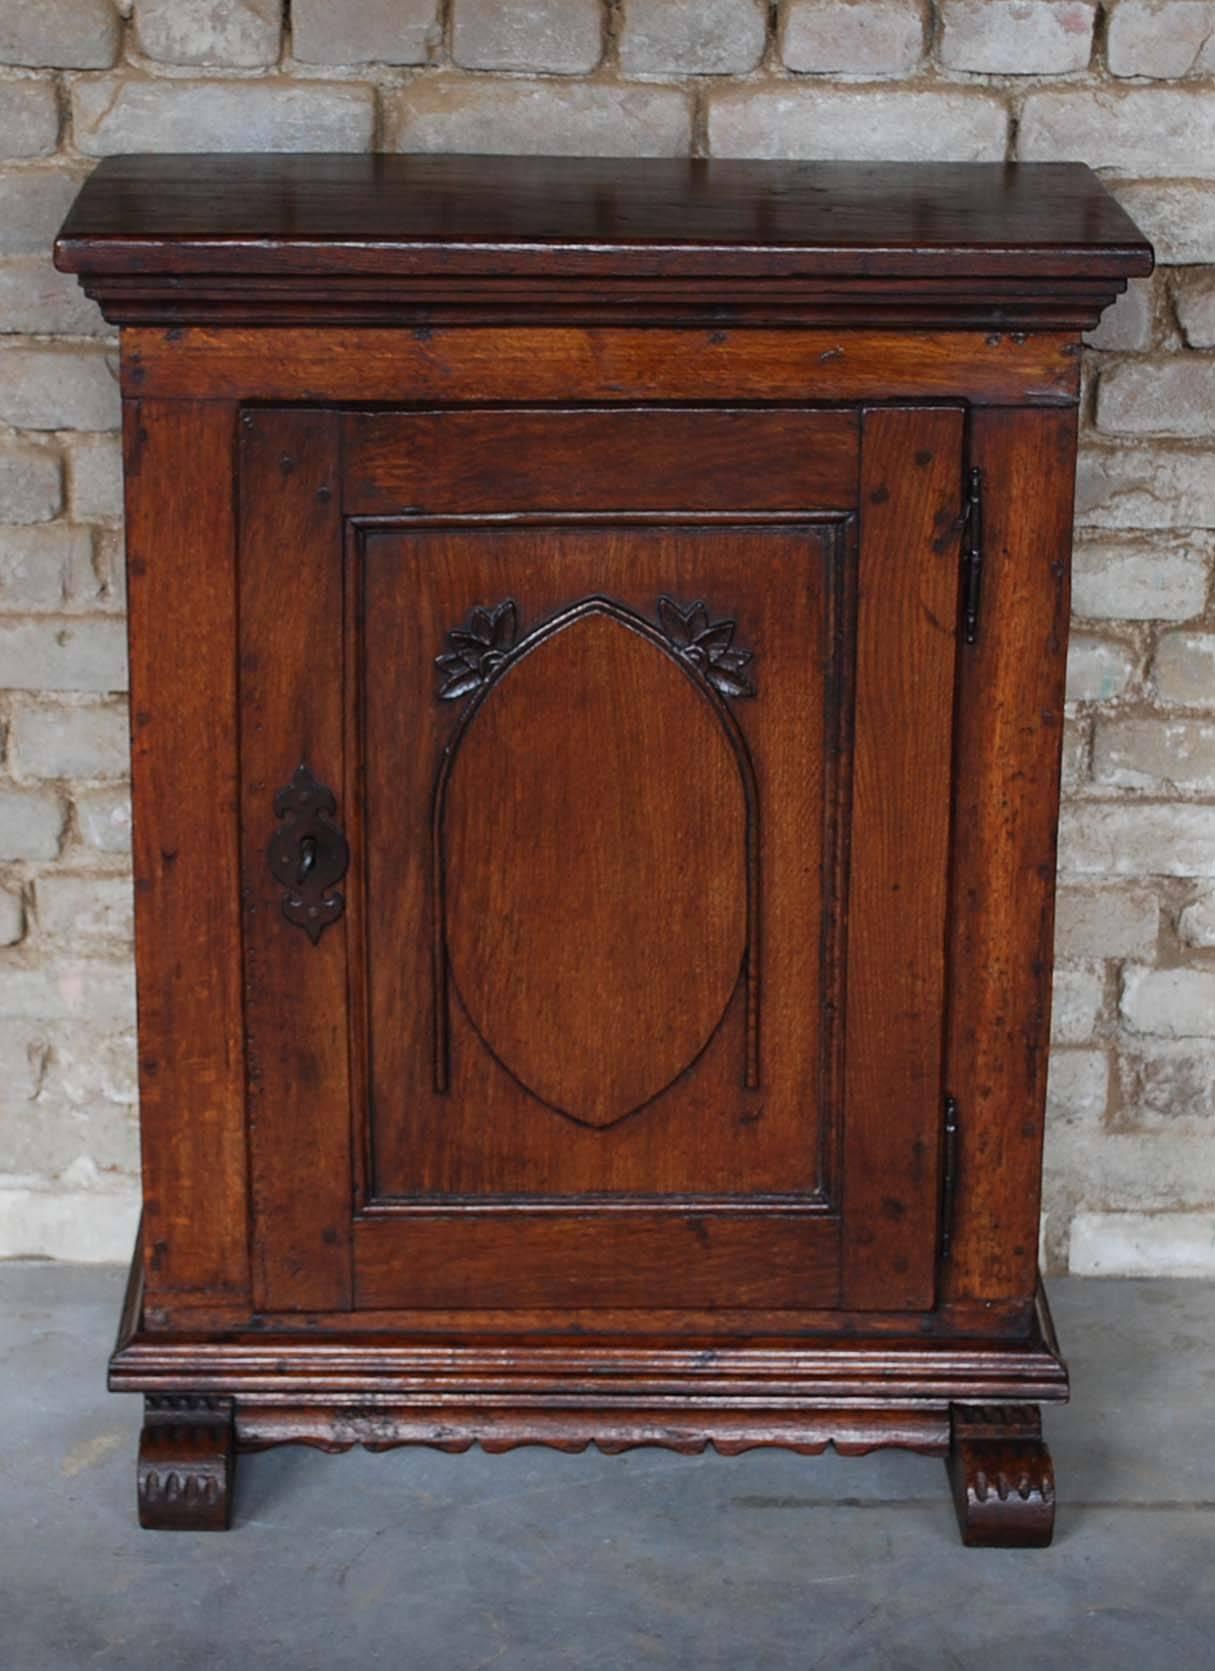 Small and shallowantique German cabinet made in solid oak. This cabinet was made in the Provence of Nortrein Westphalen, Germany, circa 1850. It has one door with a carved and elevated panel. On the bottom it has a nice carved apron and the cabinet